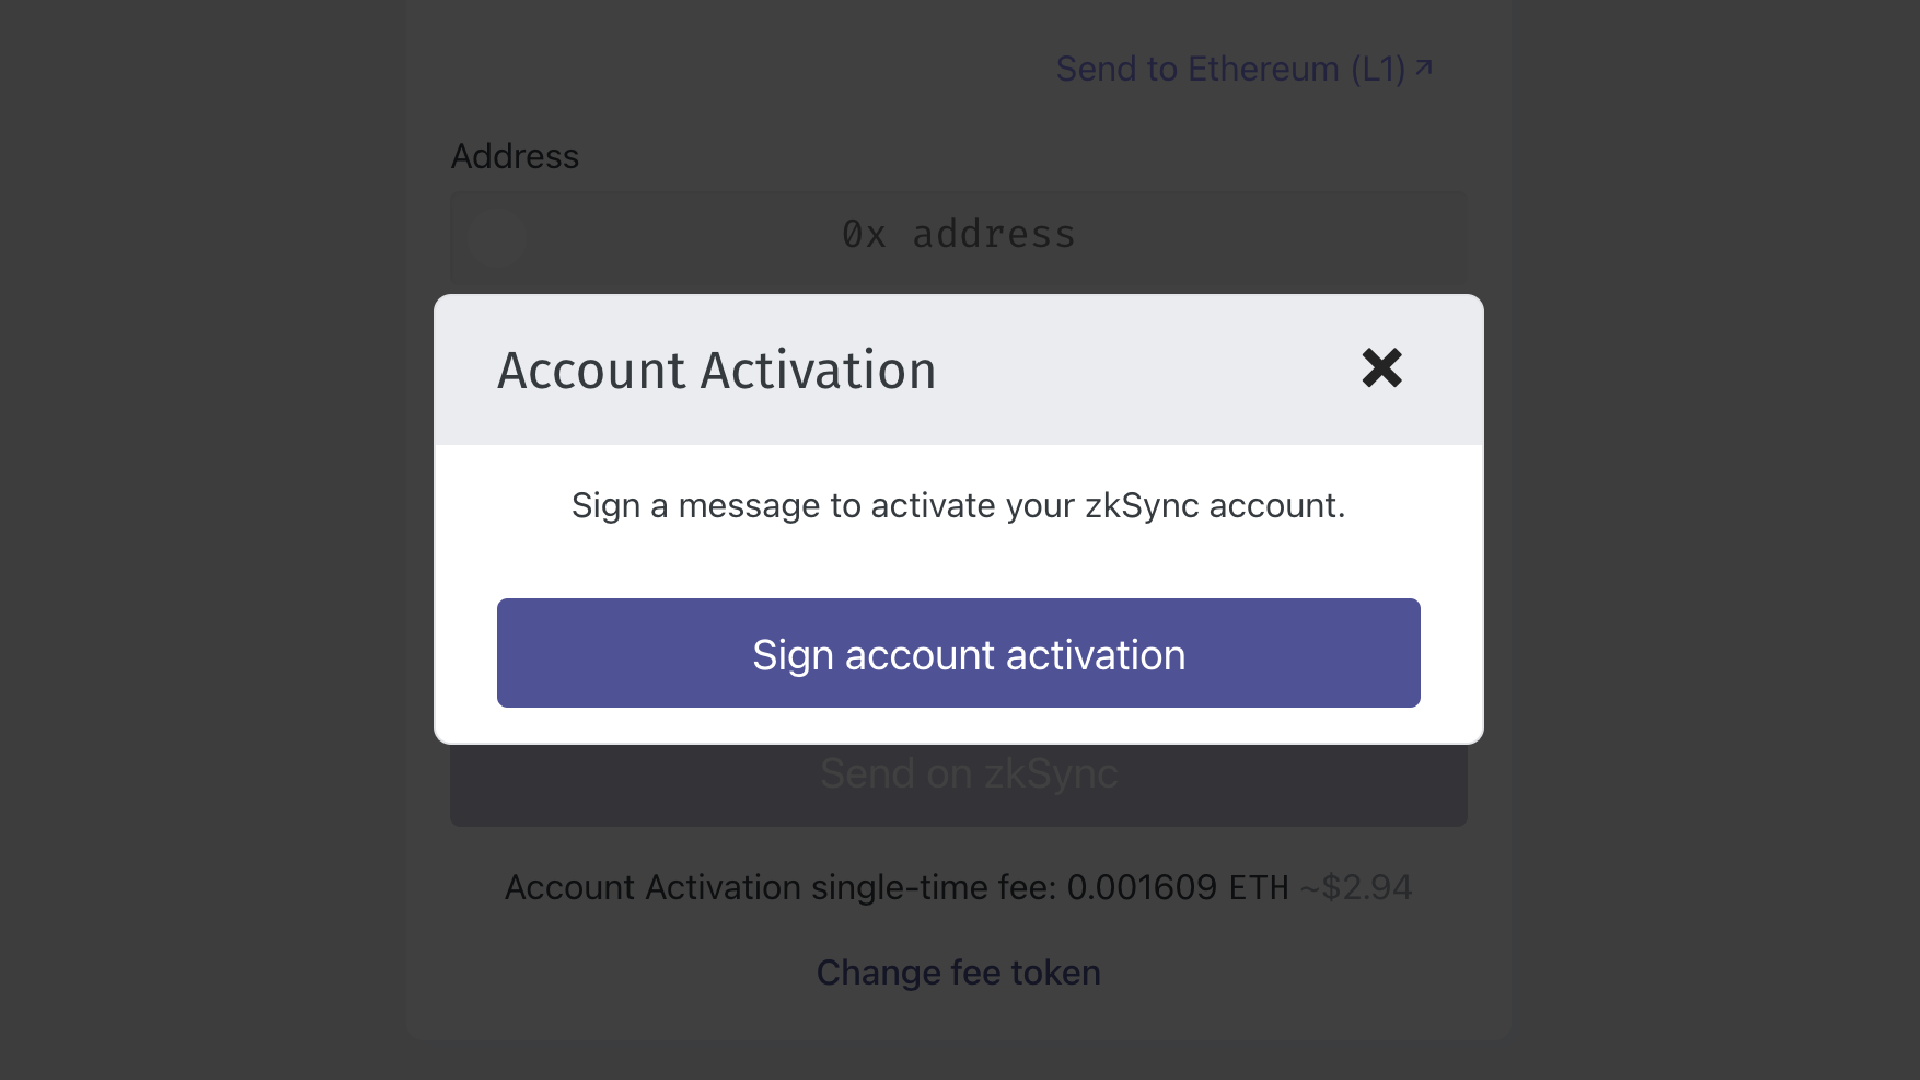 Sign Account Activation